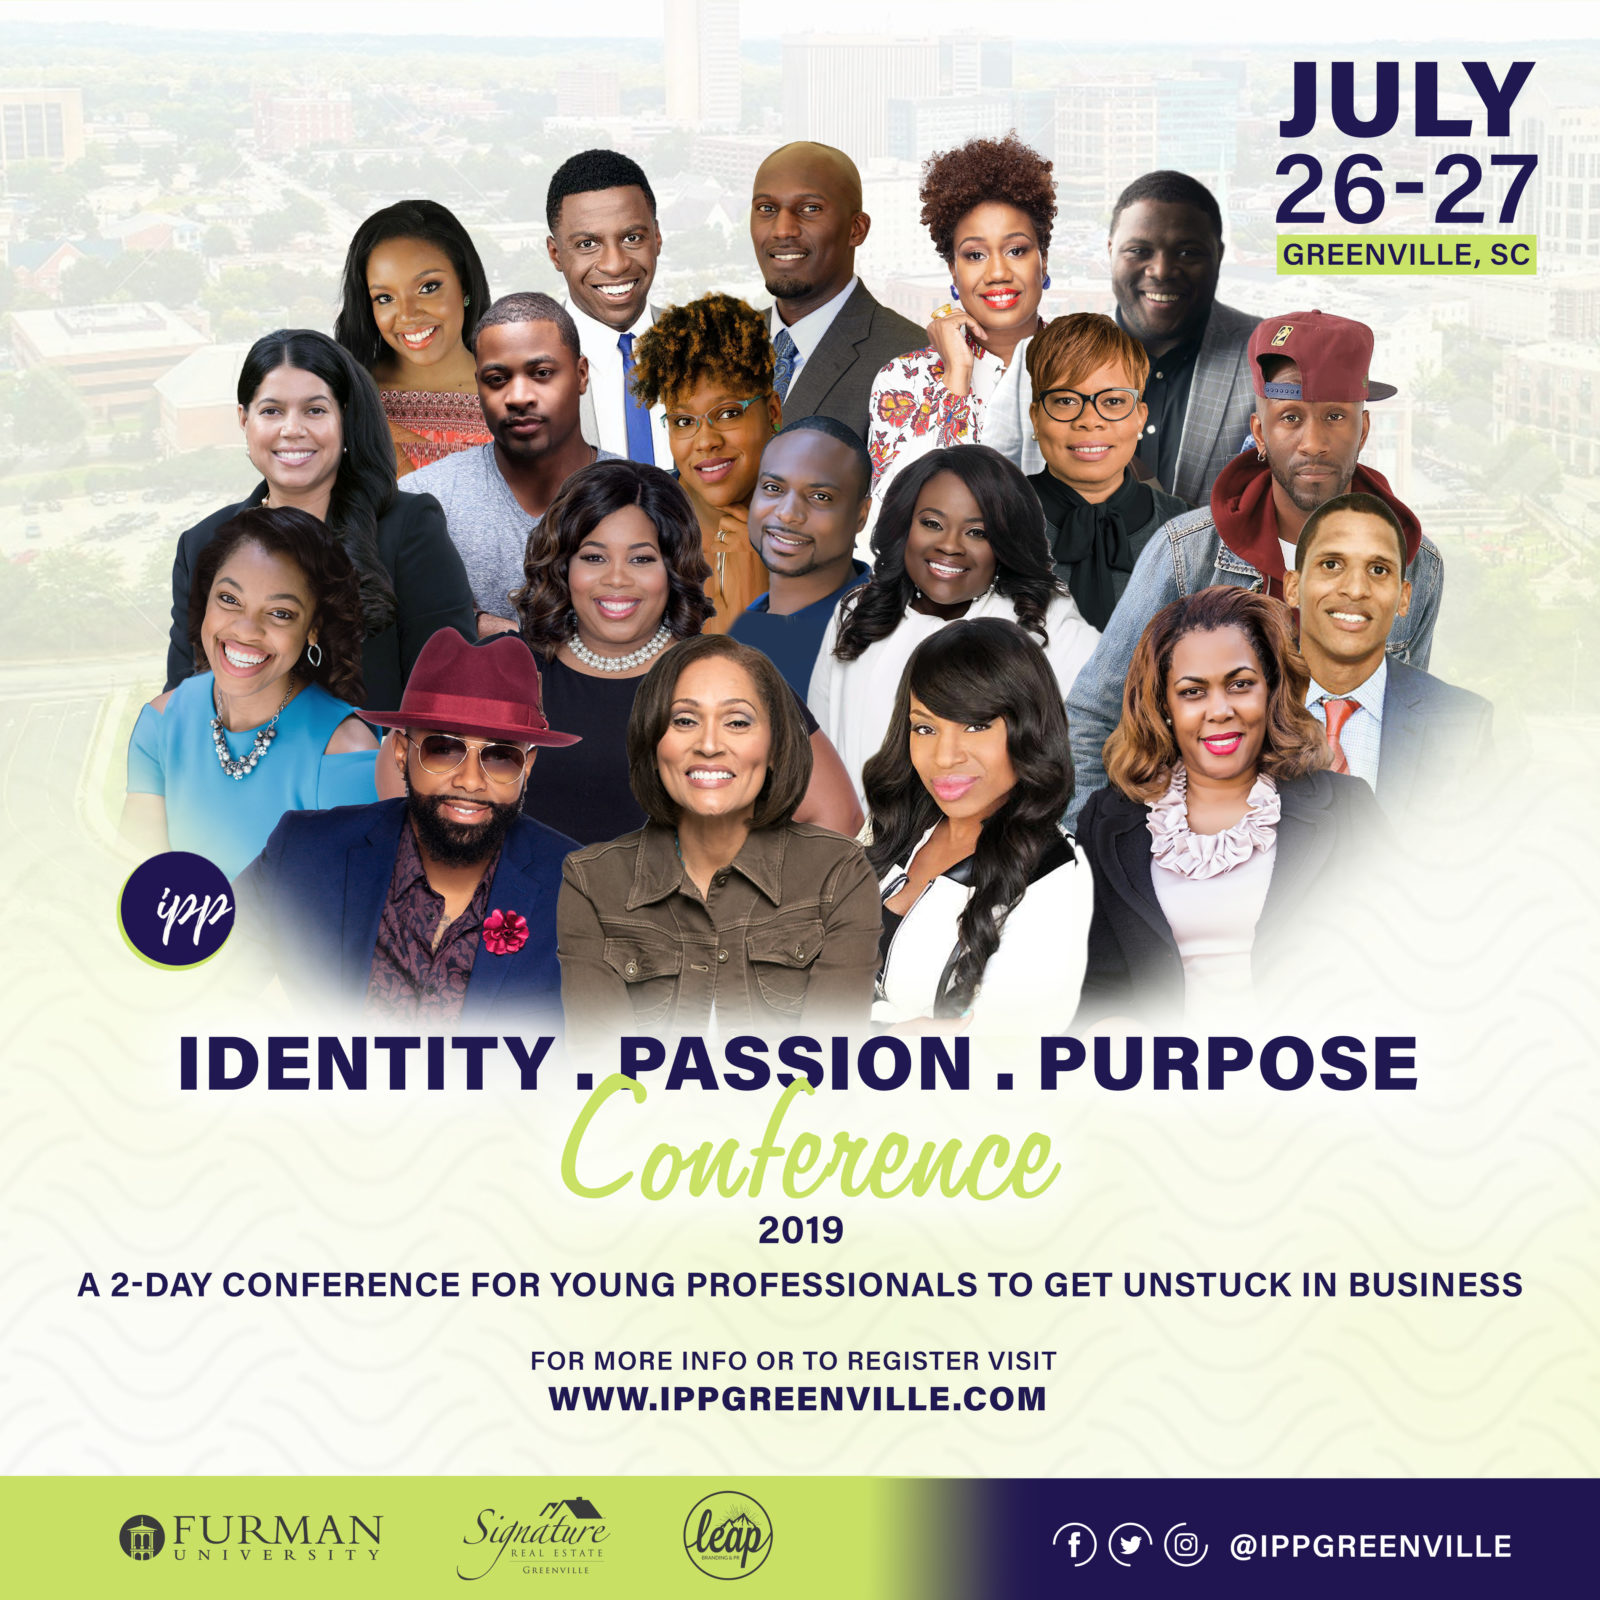 IPP Greenville Conference 2019